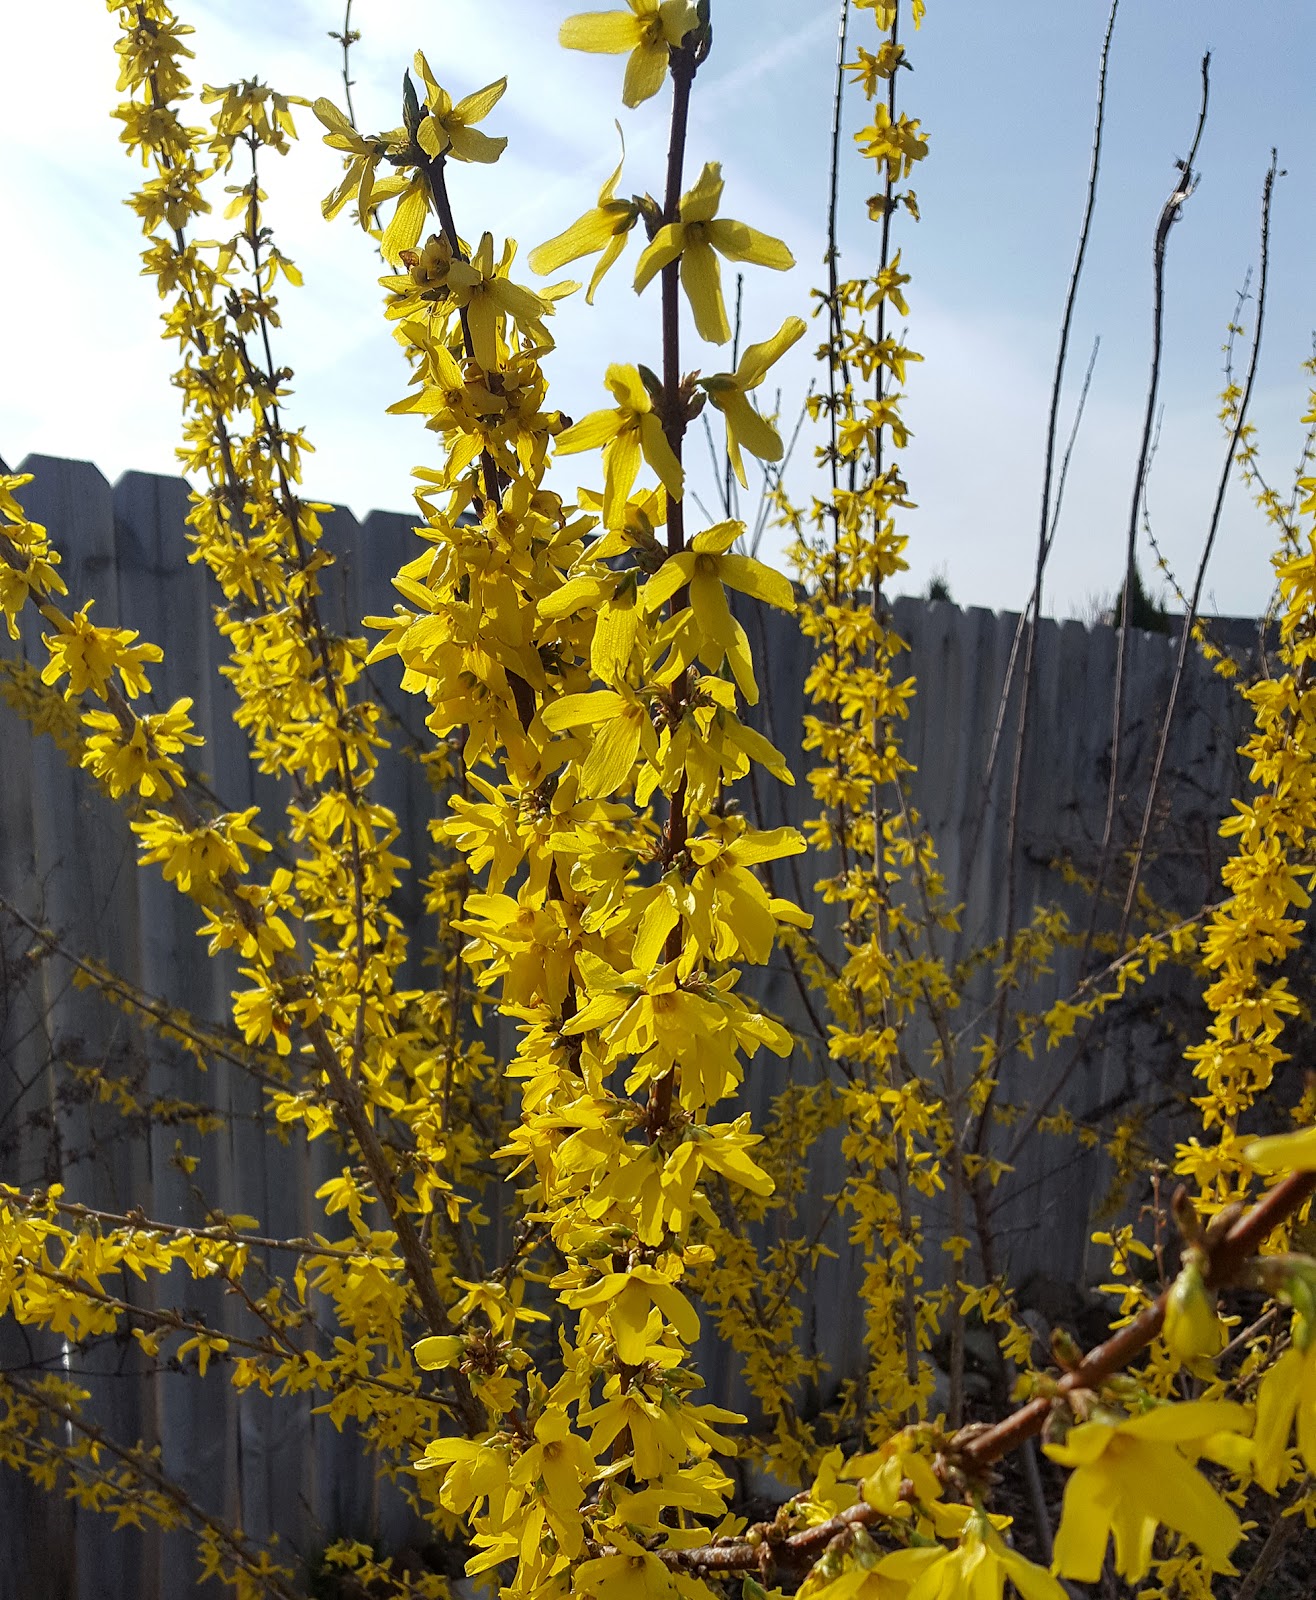 Yellow forsythia against a wooden fence and blue sky